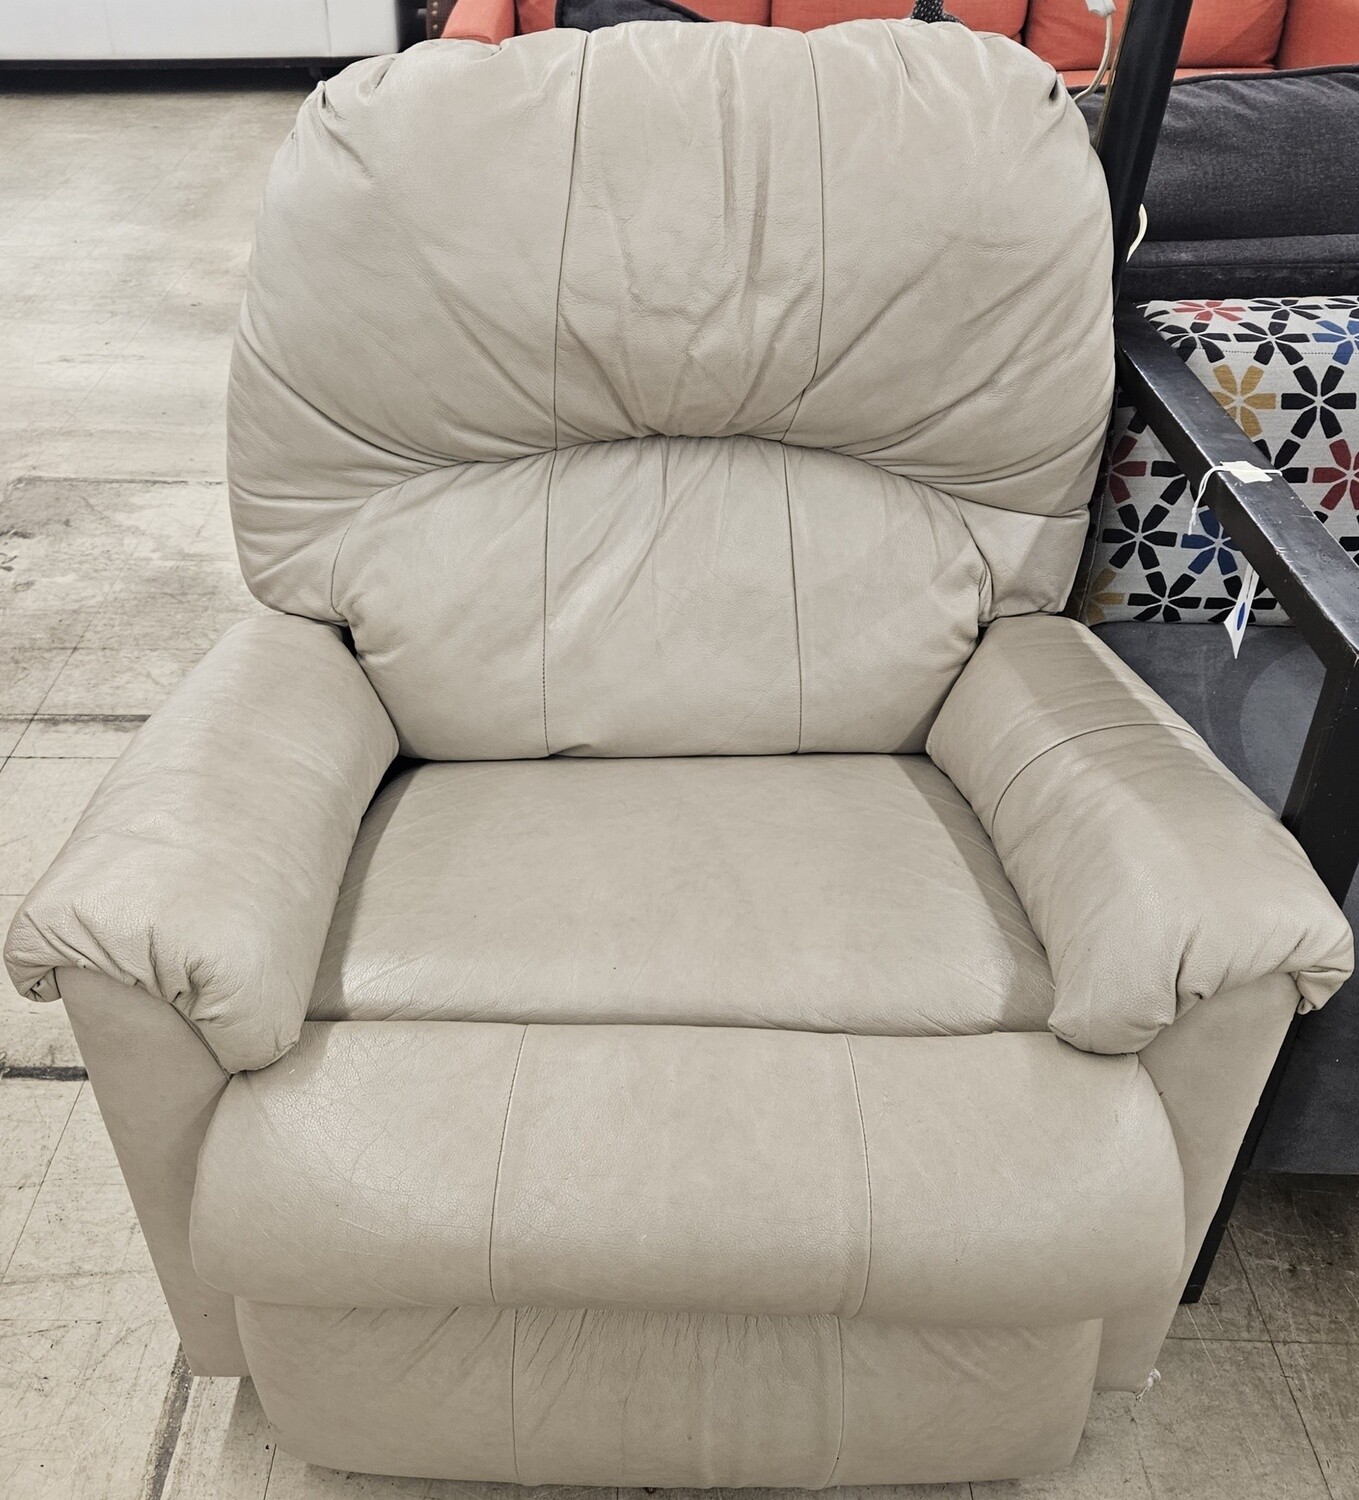 "Serenity in Leather: Beige Recliner Chair for Ultimate Comfort"